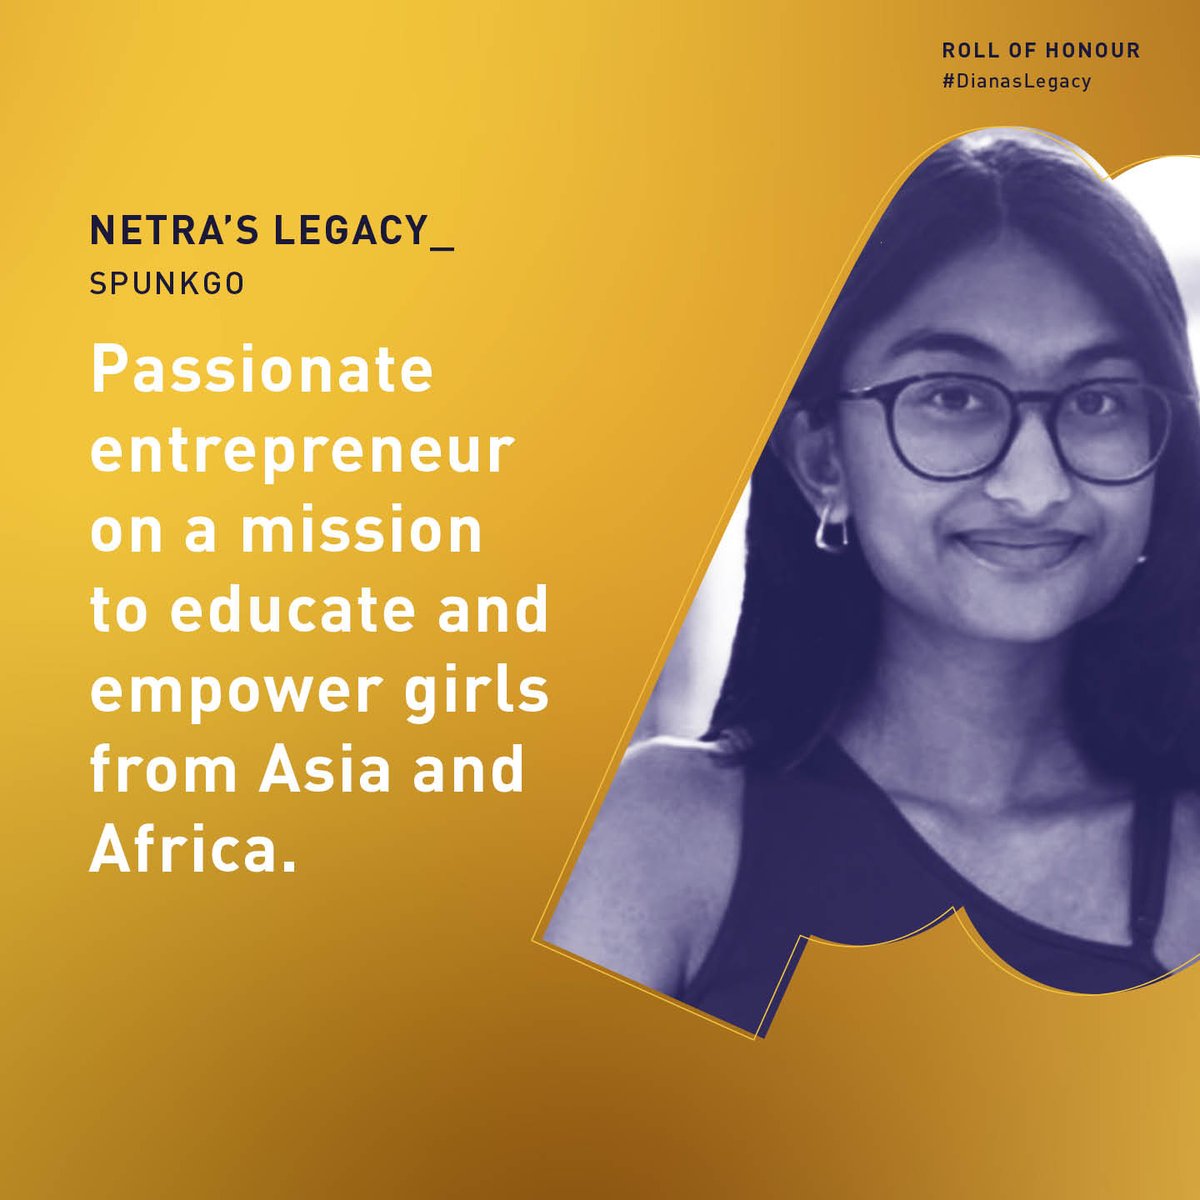 (1/3) NETRA’S LEGACY_

Netra set up her organisation SpunkGo in 2020, which brings together over 5,000 young girls from over 20 countries and from all walks of life to one community platform with the objective of using social media for good.